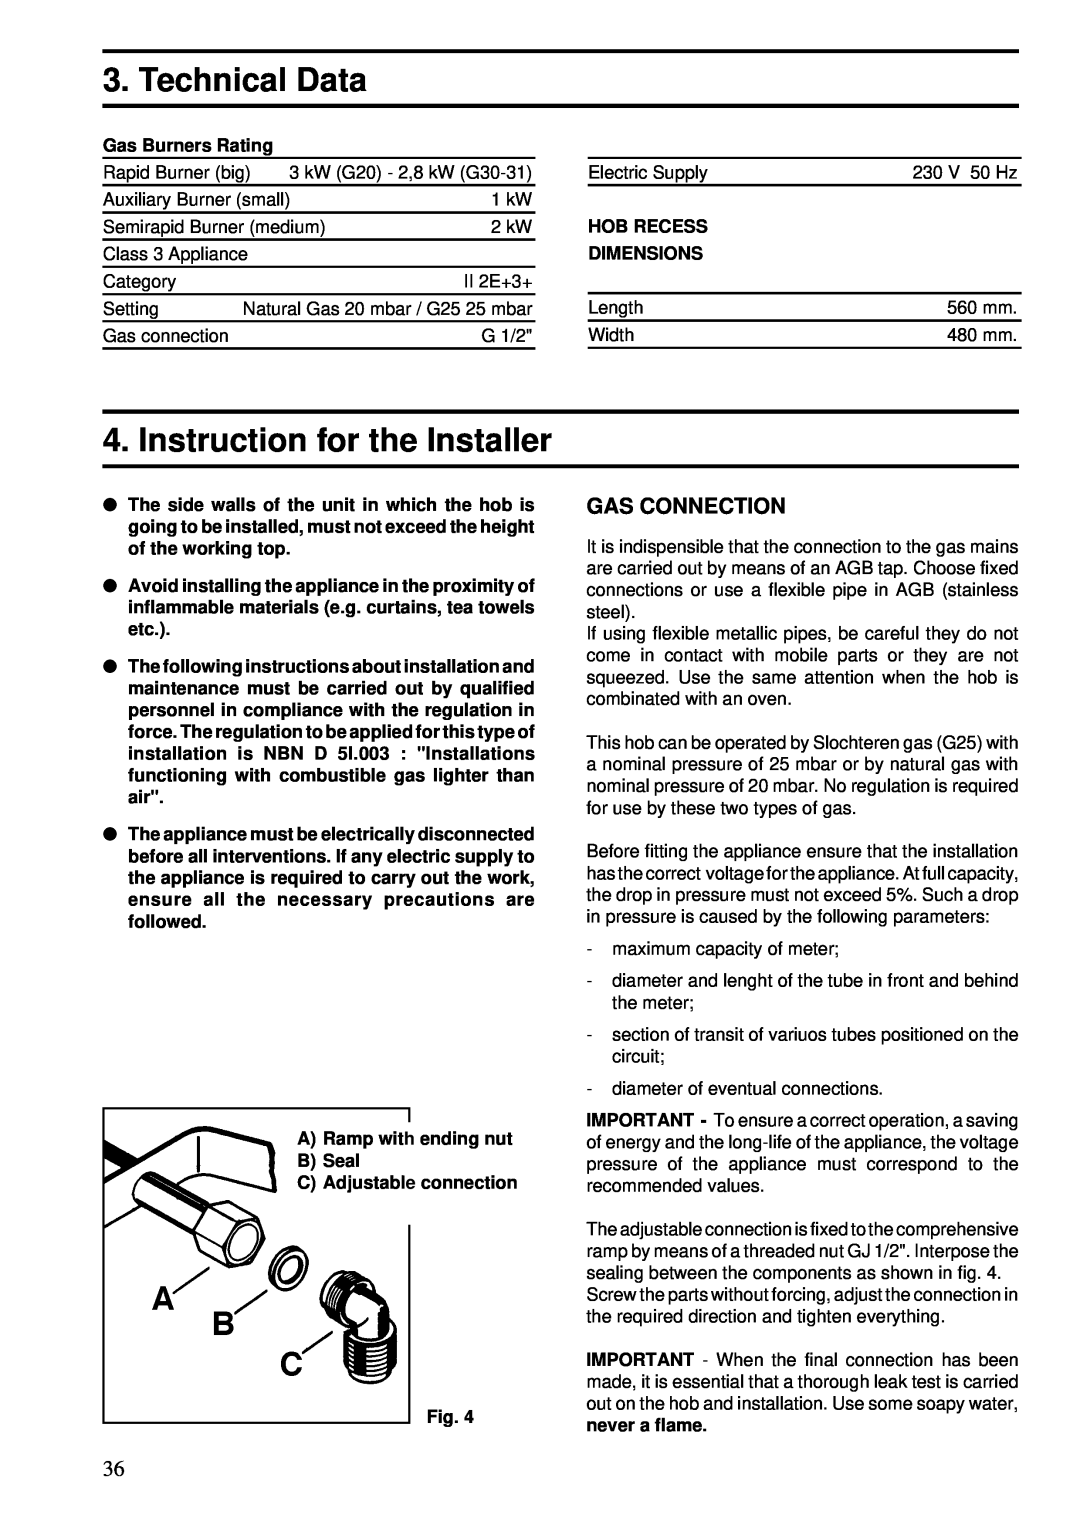 Zanussi ZGF 643 manual Technical Data, Instruction for the Installer, Gas Connection 